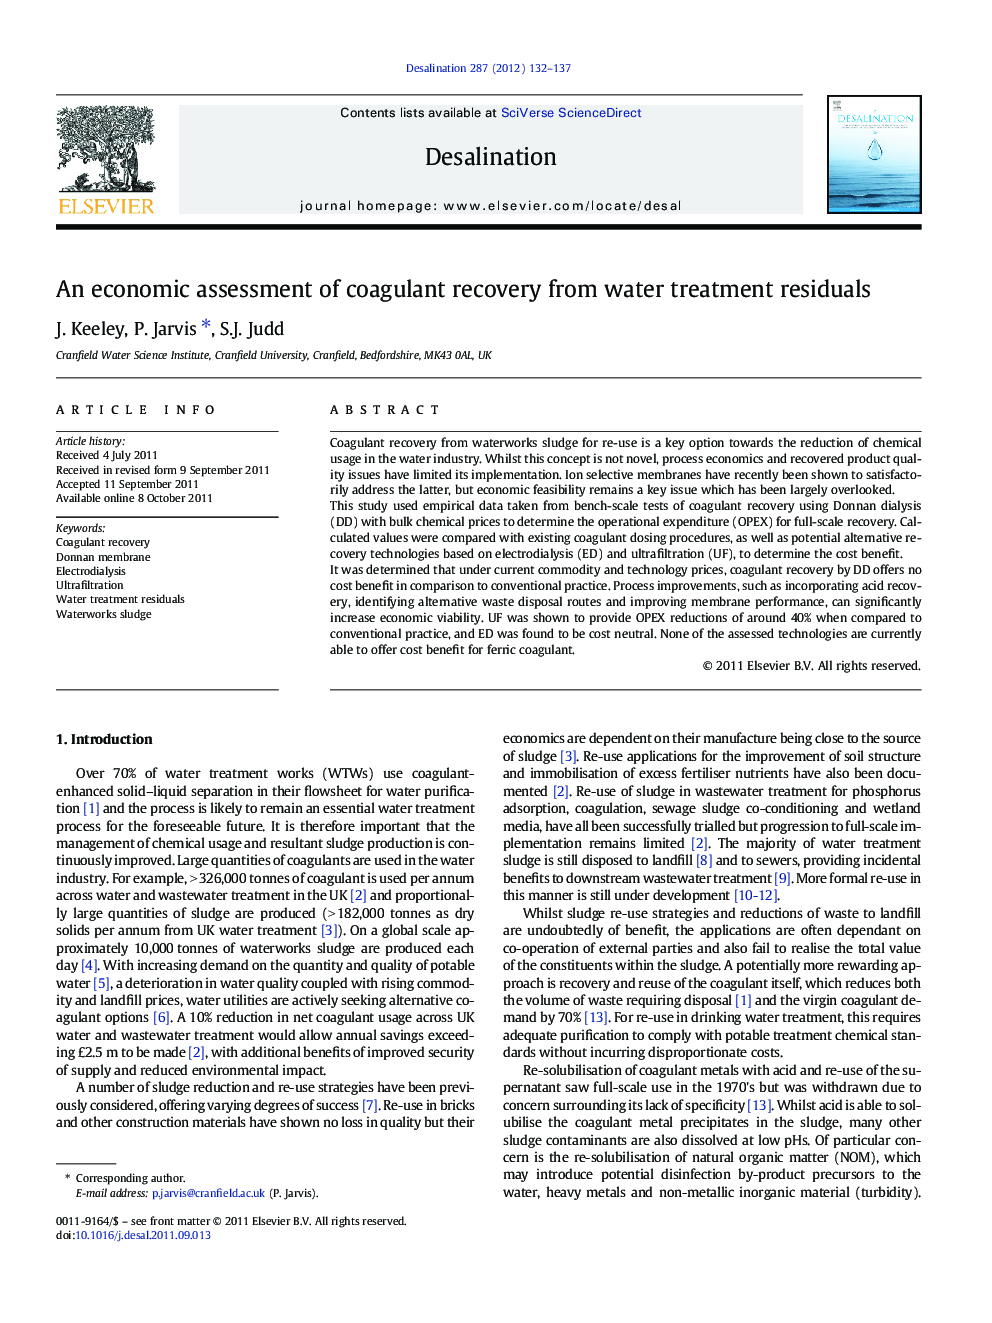 An economic assessment of coagulant recovery from water treatment residuals